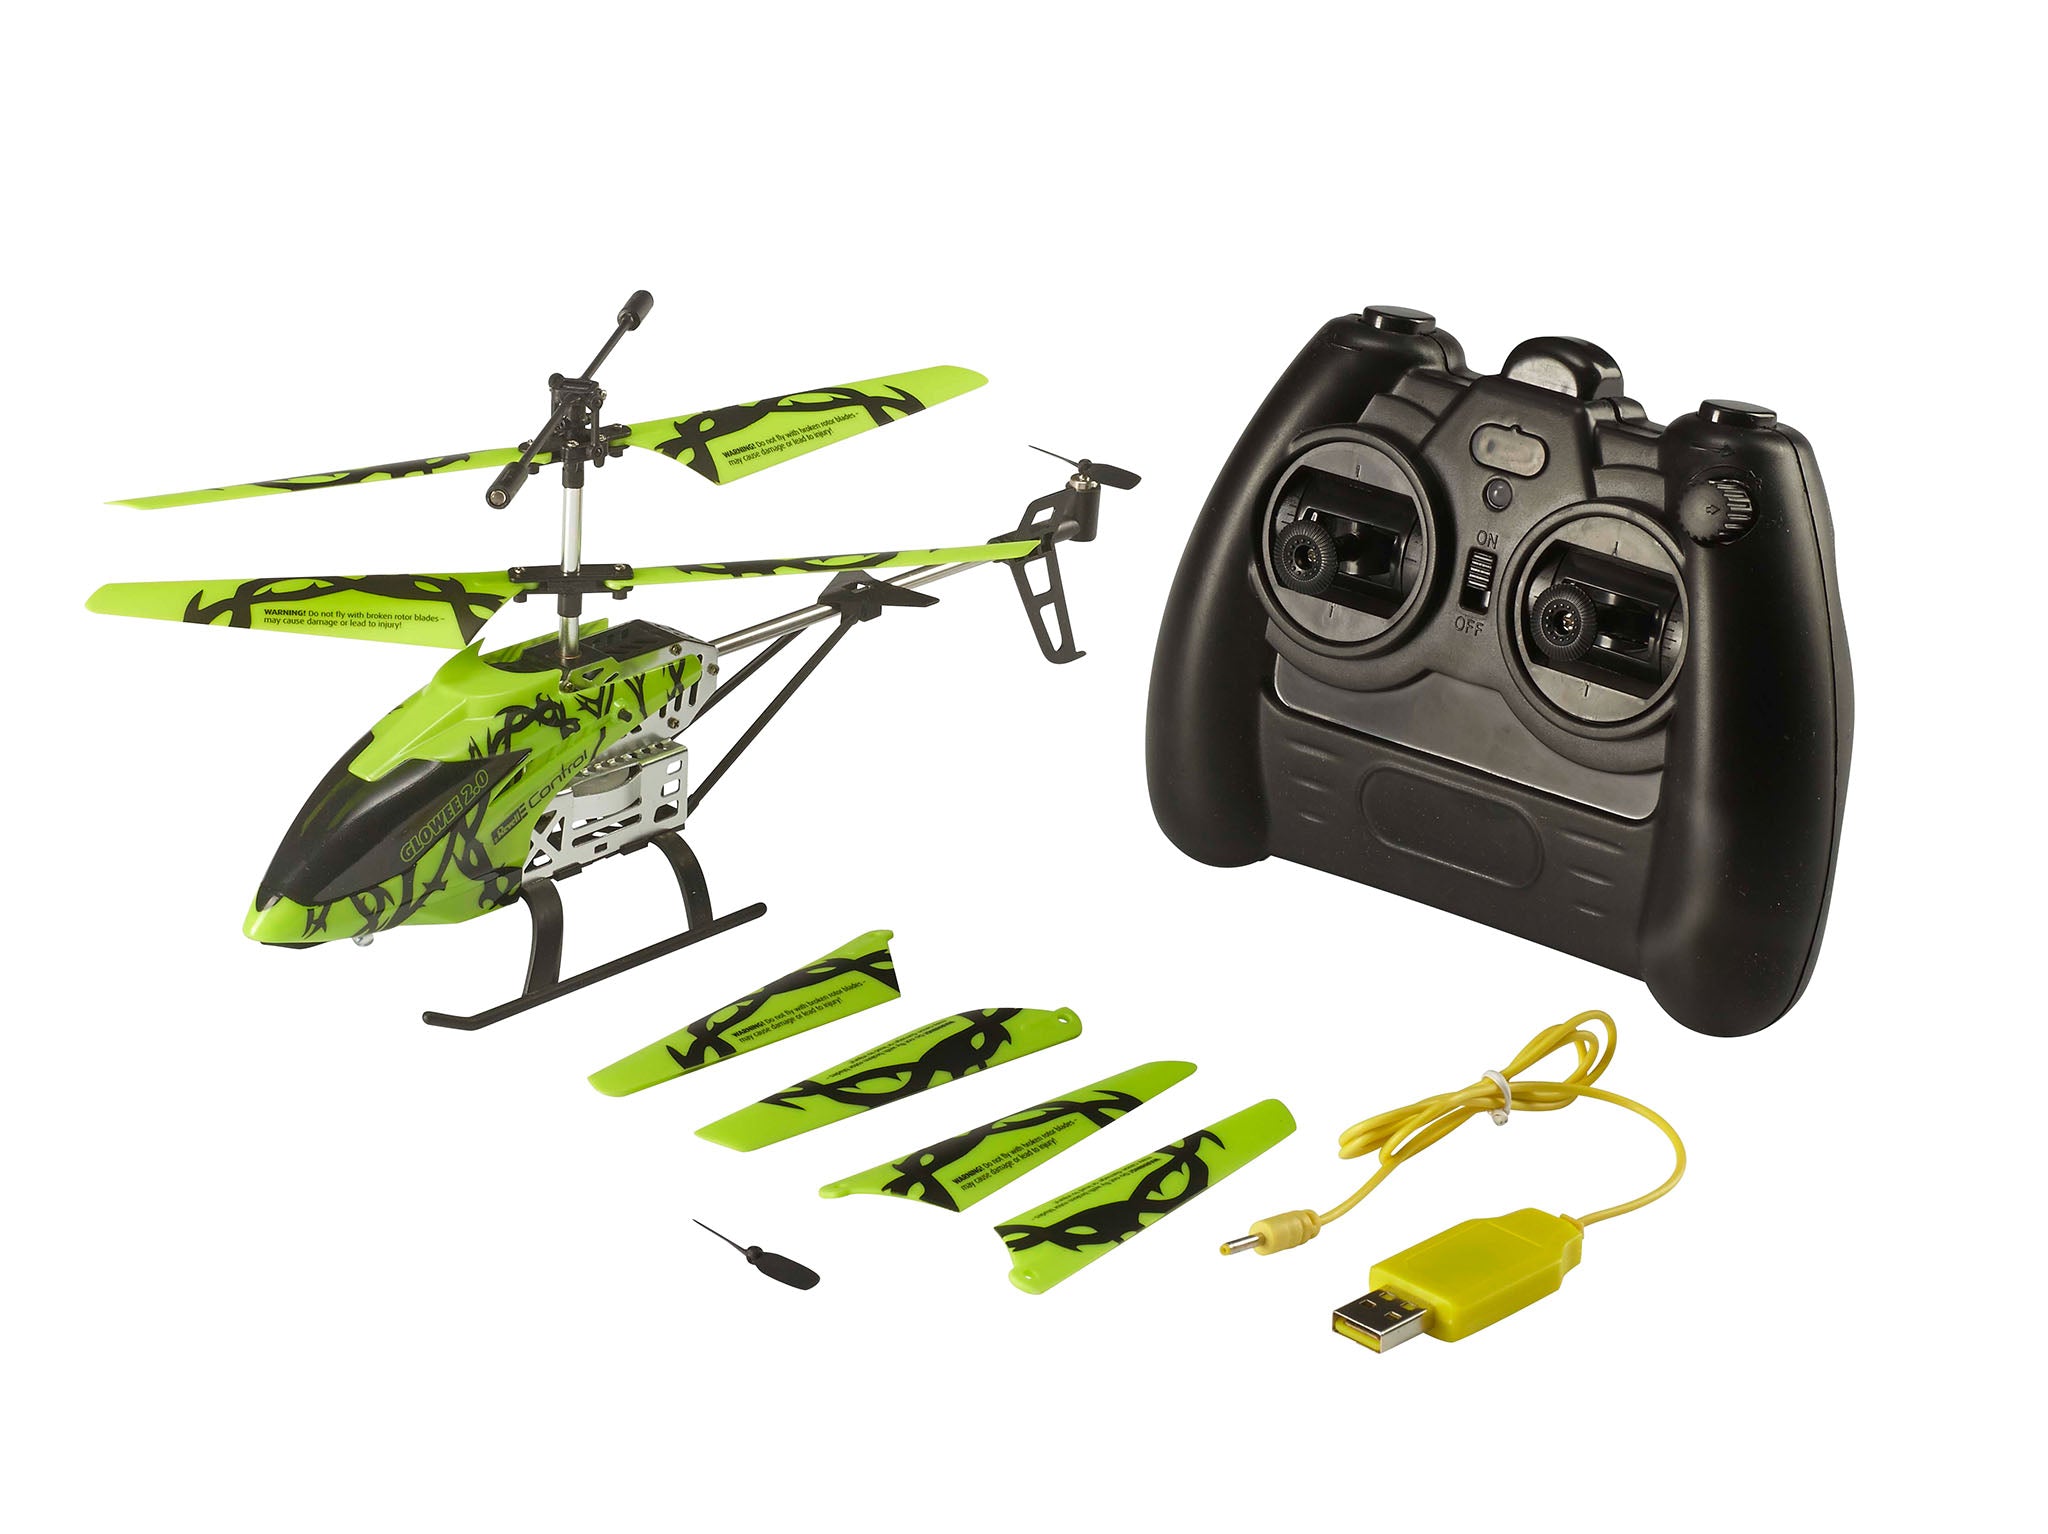 Radio Control Helicopter Revell RC Helicopter Glowee 2.0